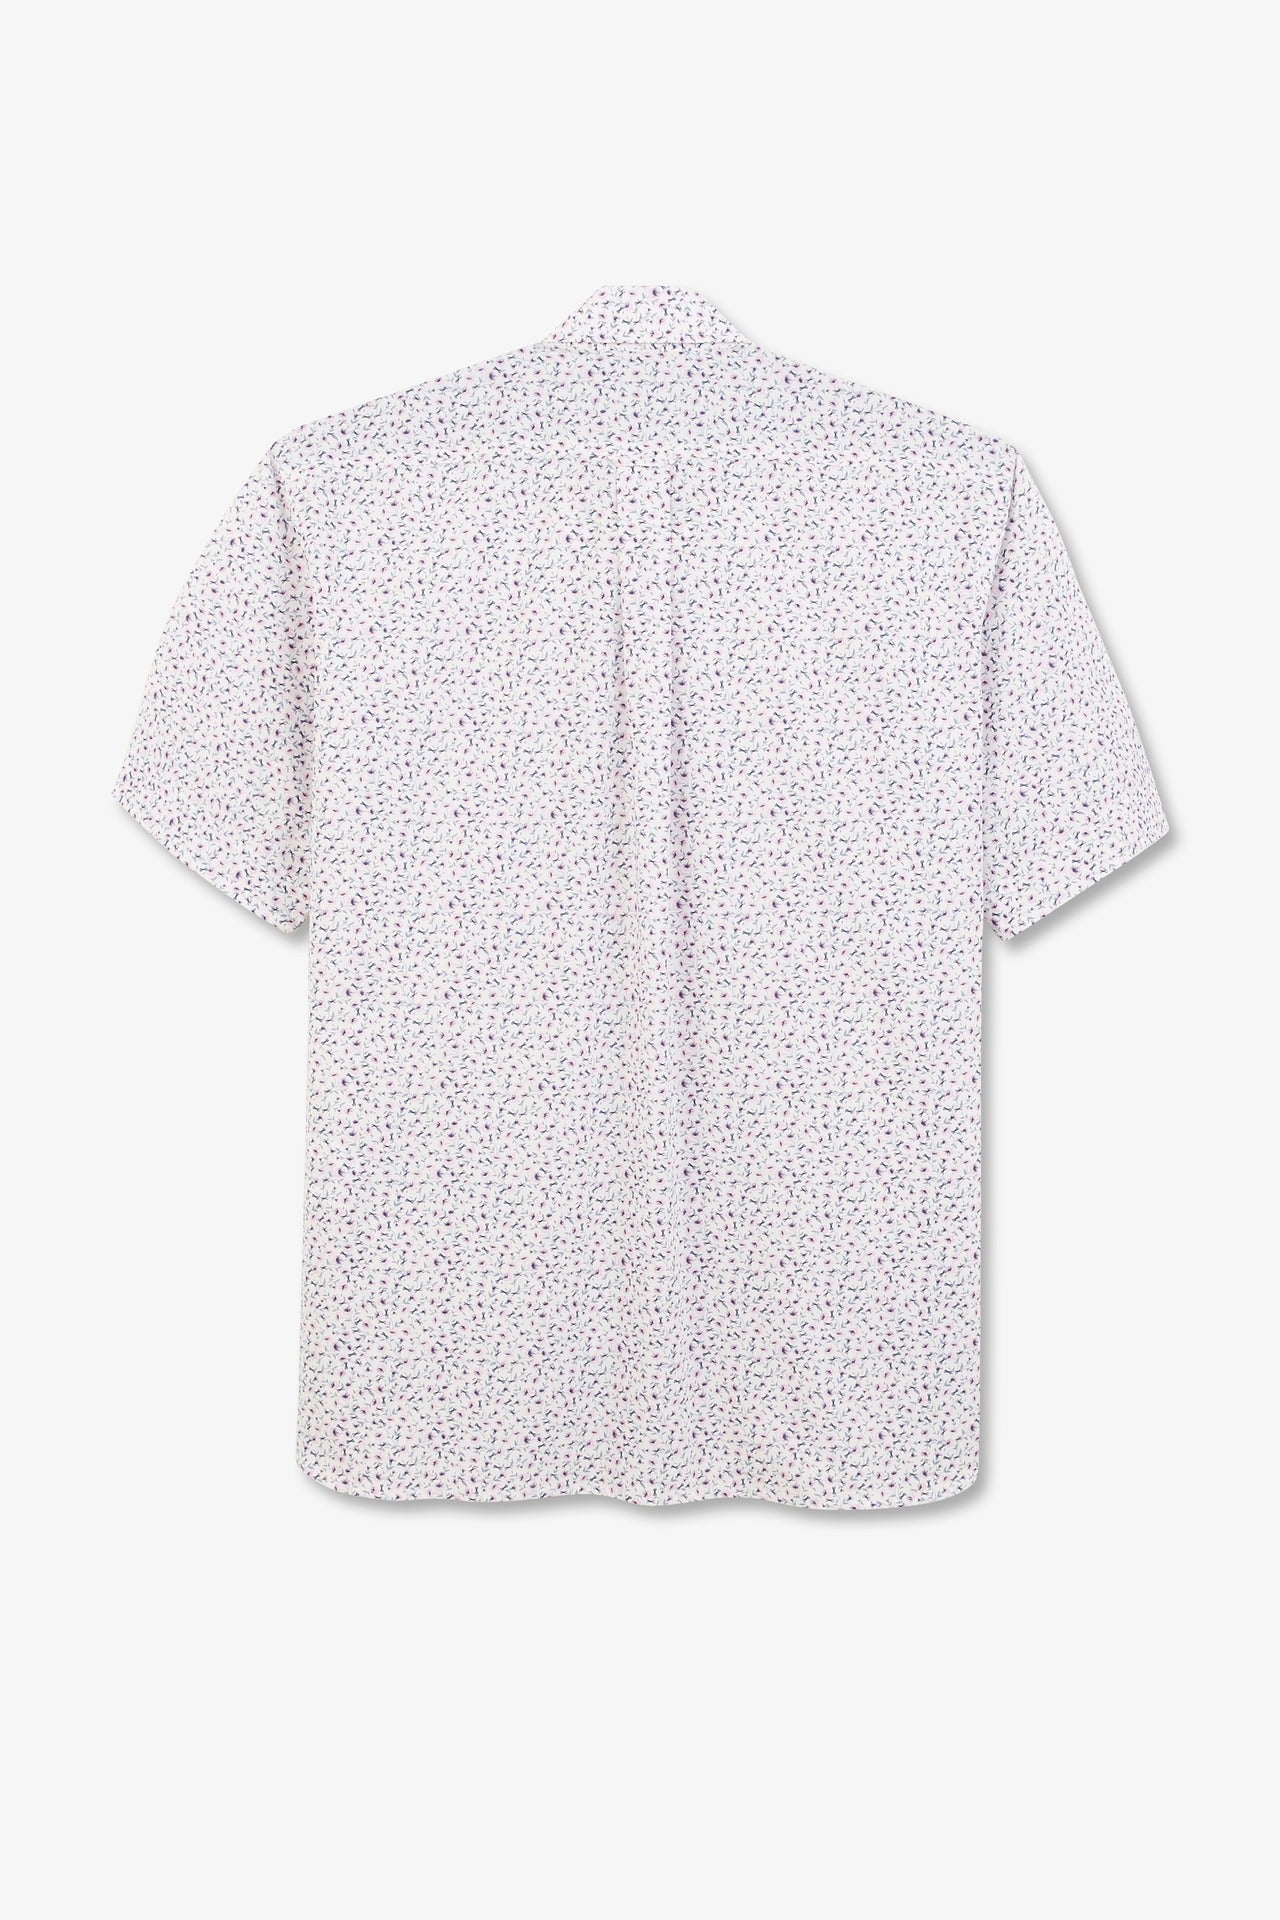 White shirt with exclusive floral print - Image 5